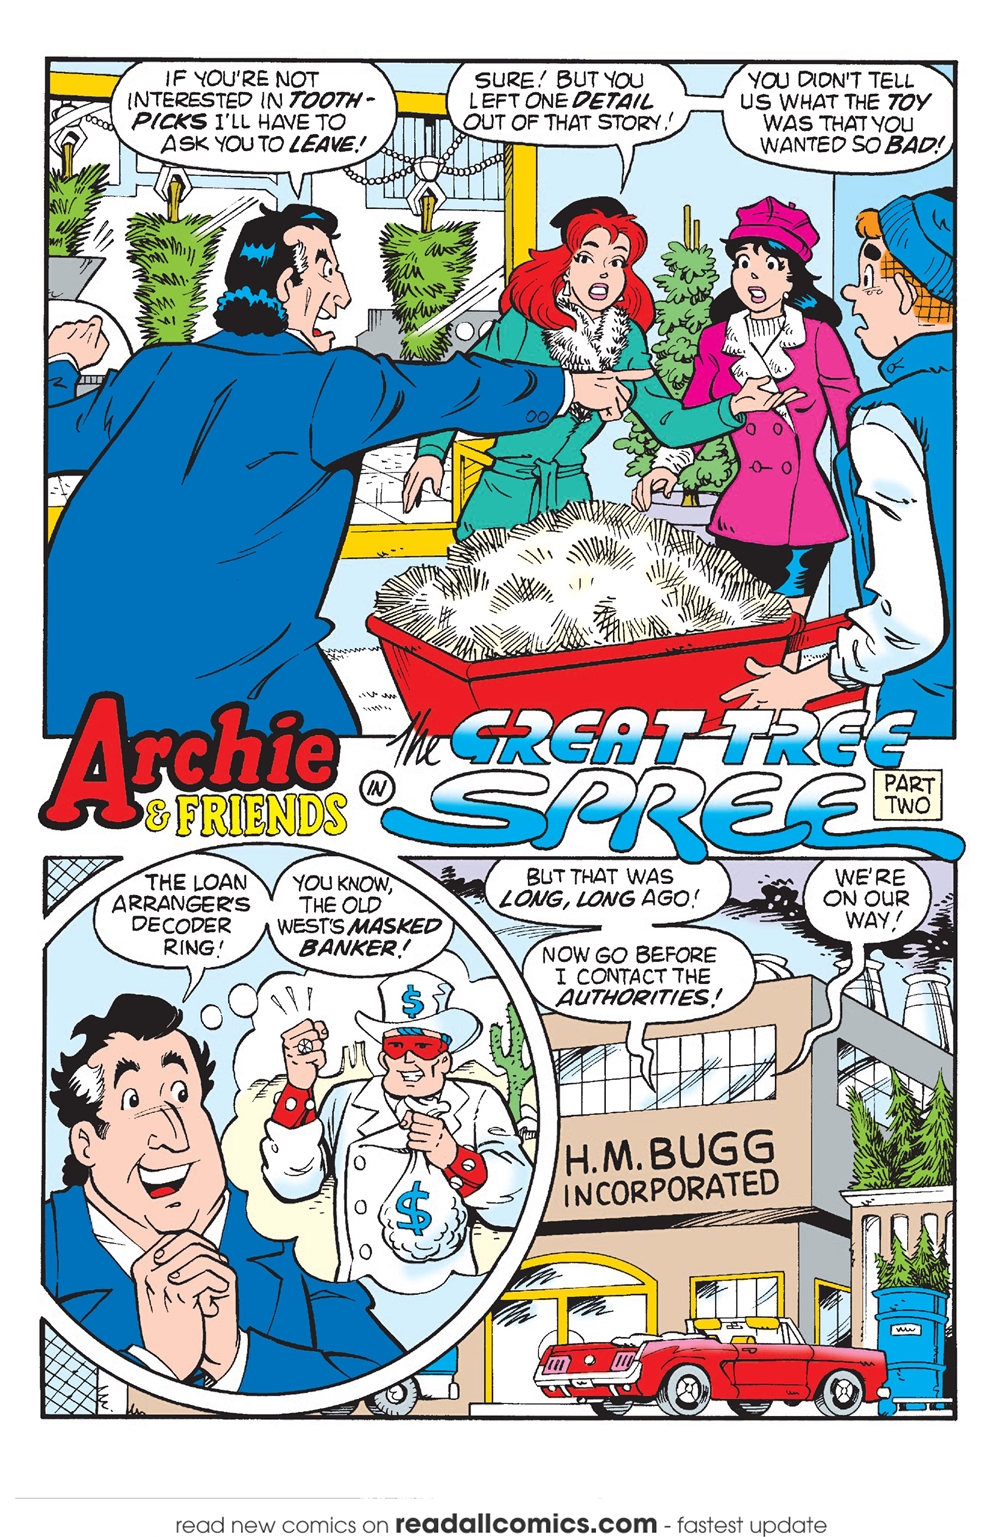 Archie%2527s%2BChristmas%2BSpectacular%2B2020%2B001-008